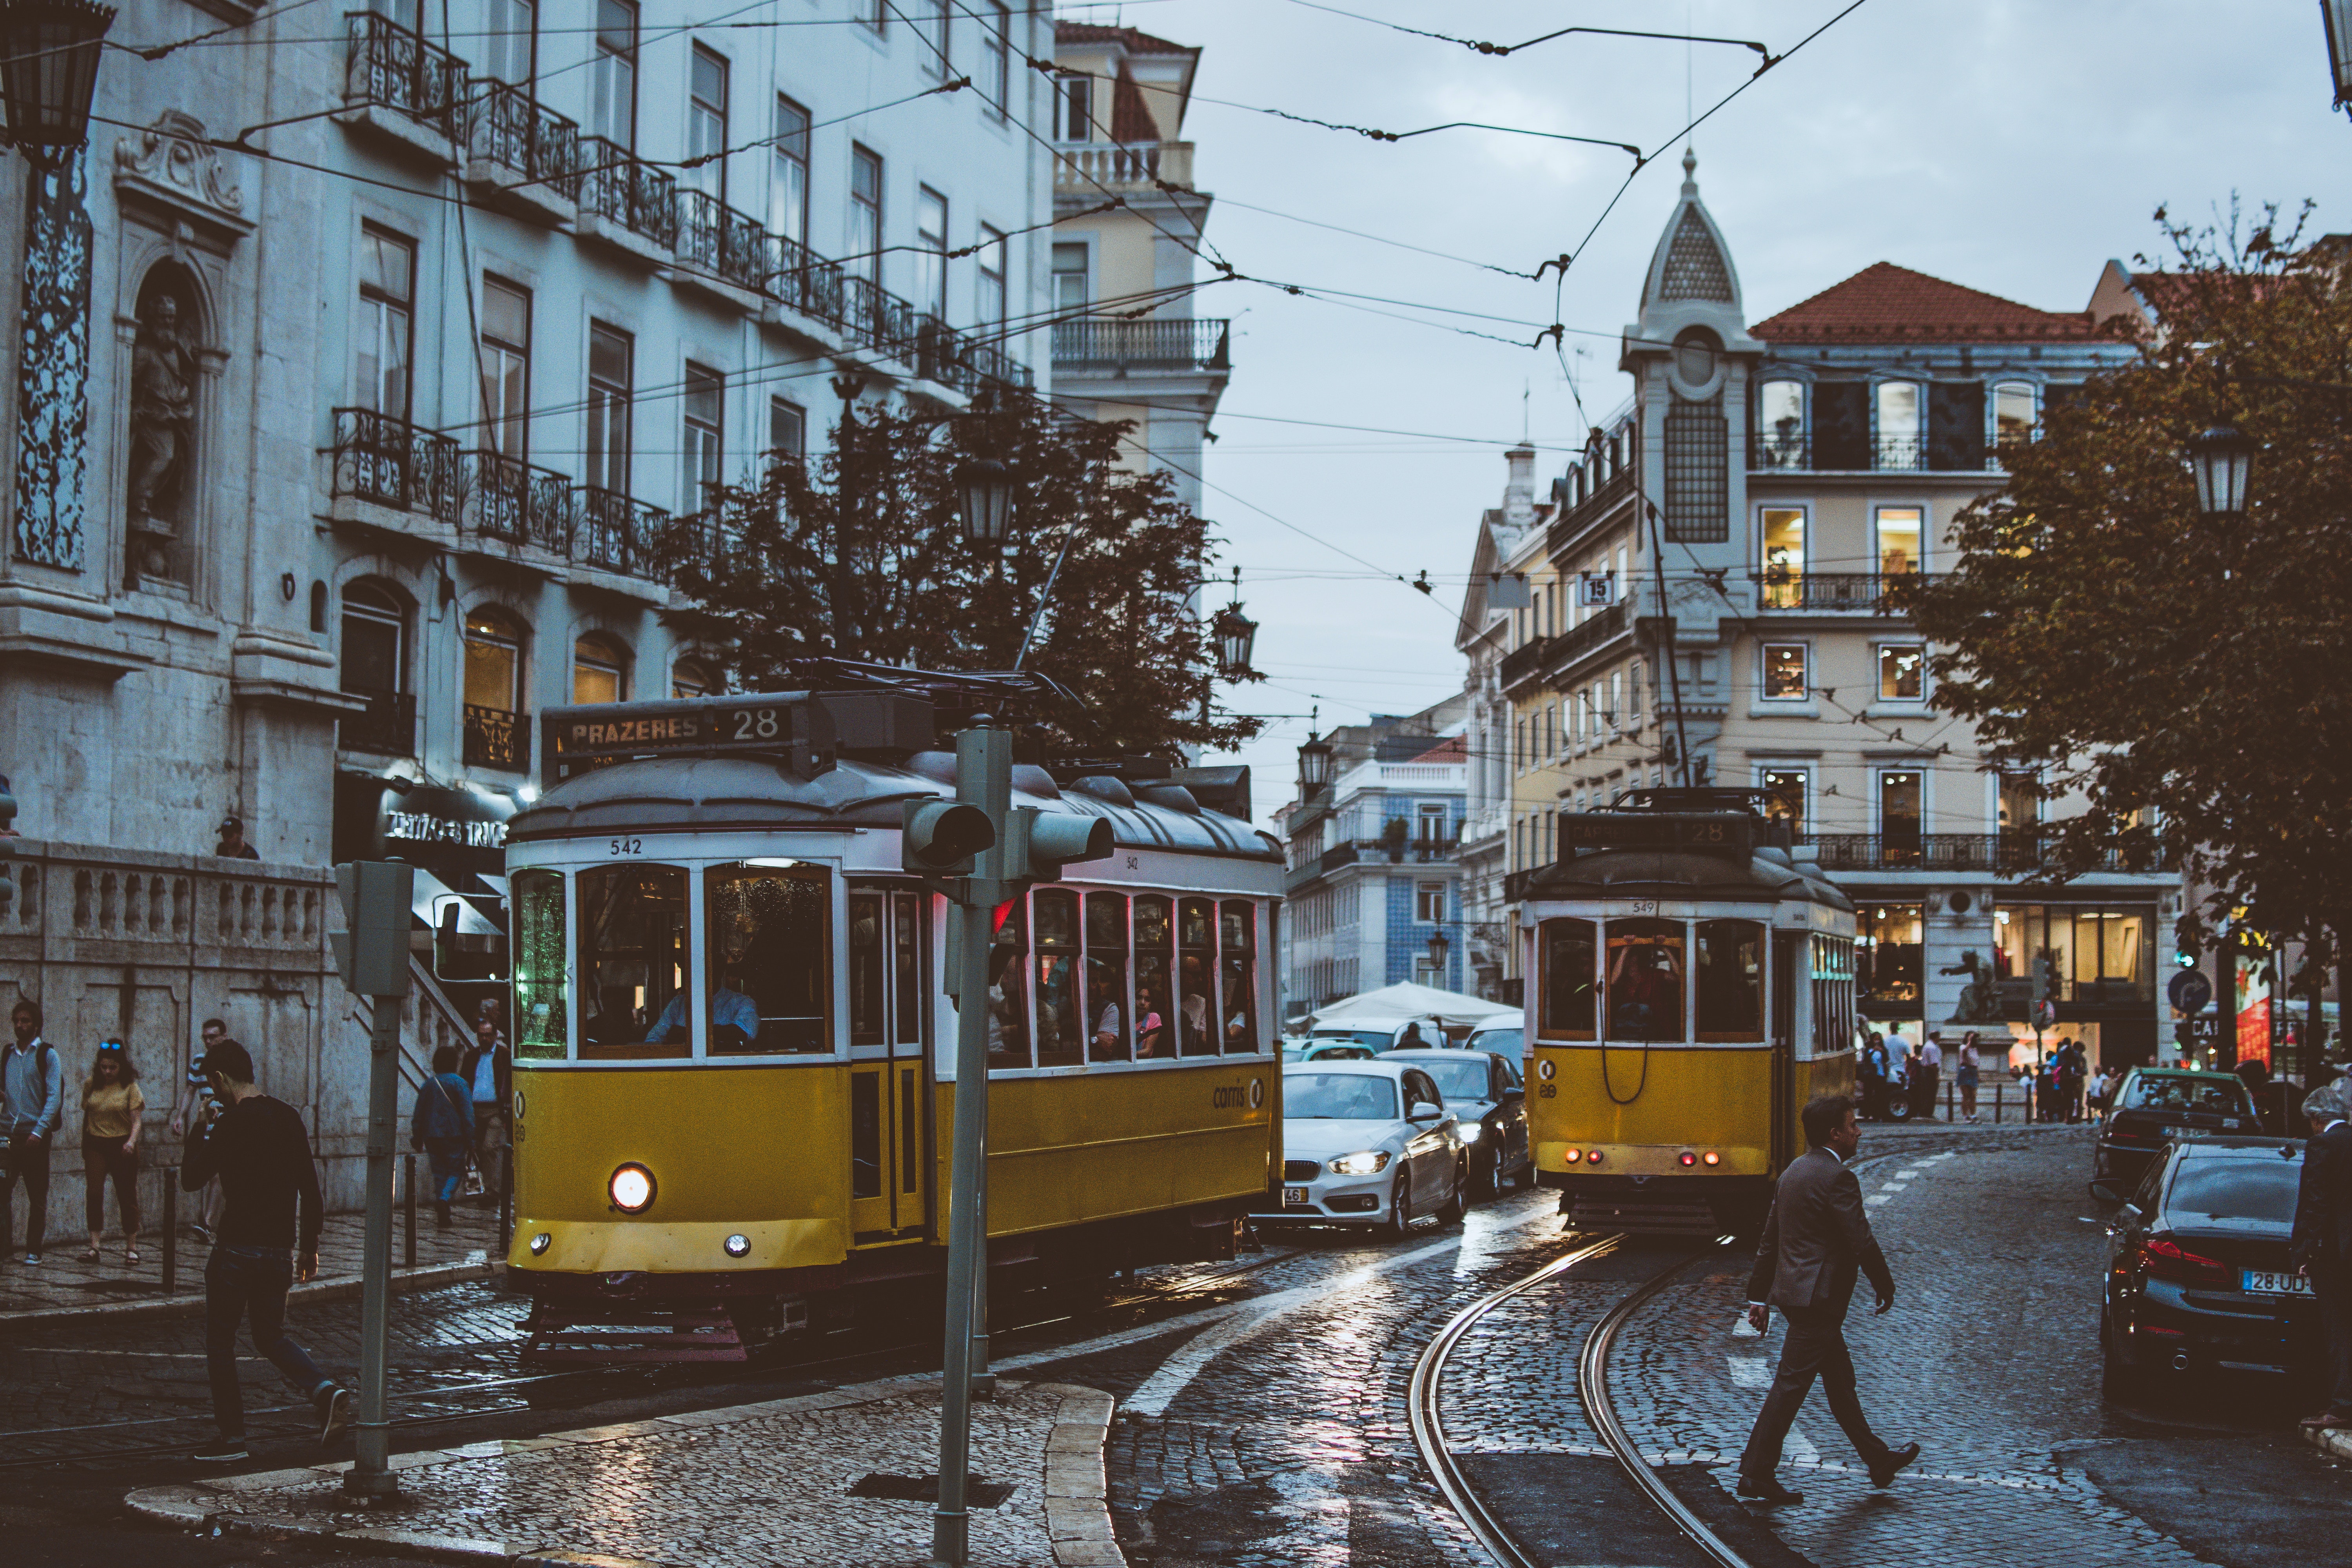 Portugal photos download the best free portugal stock photos hd images